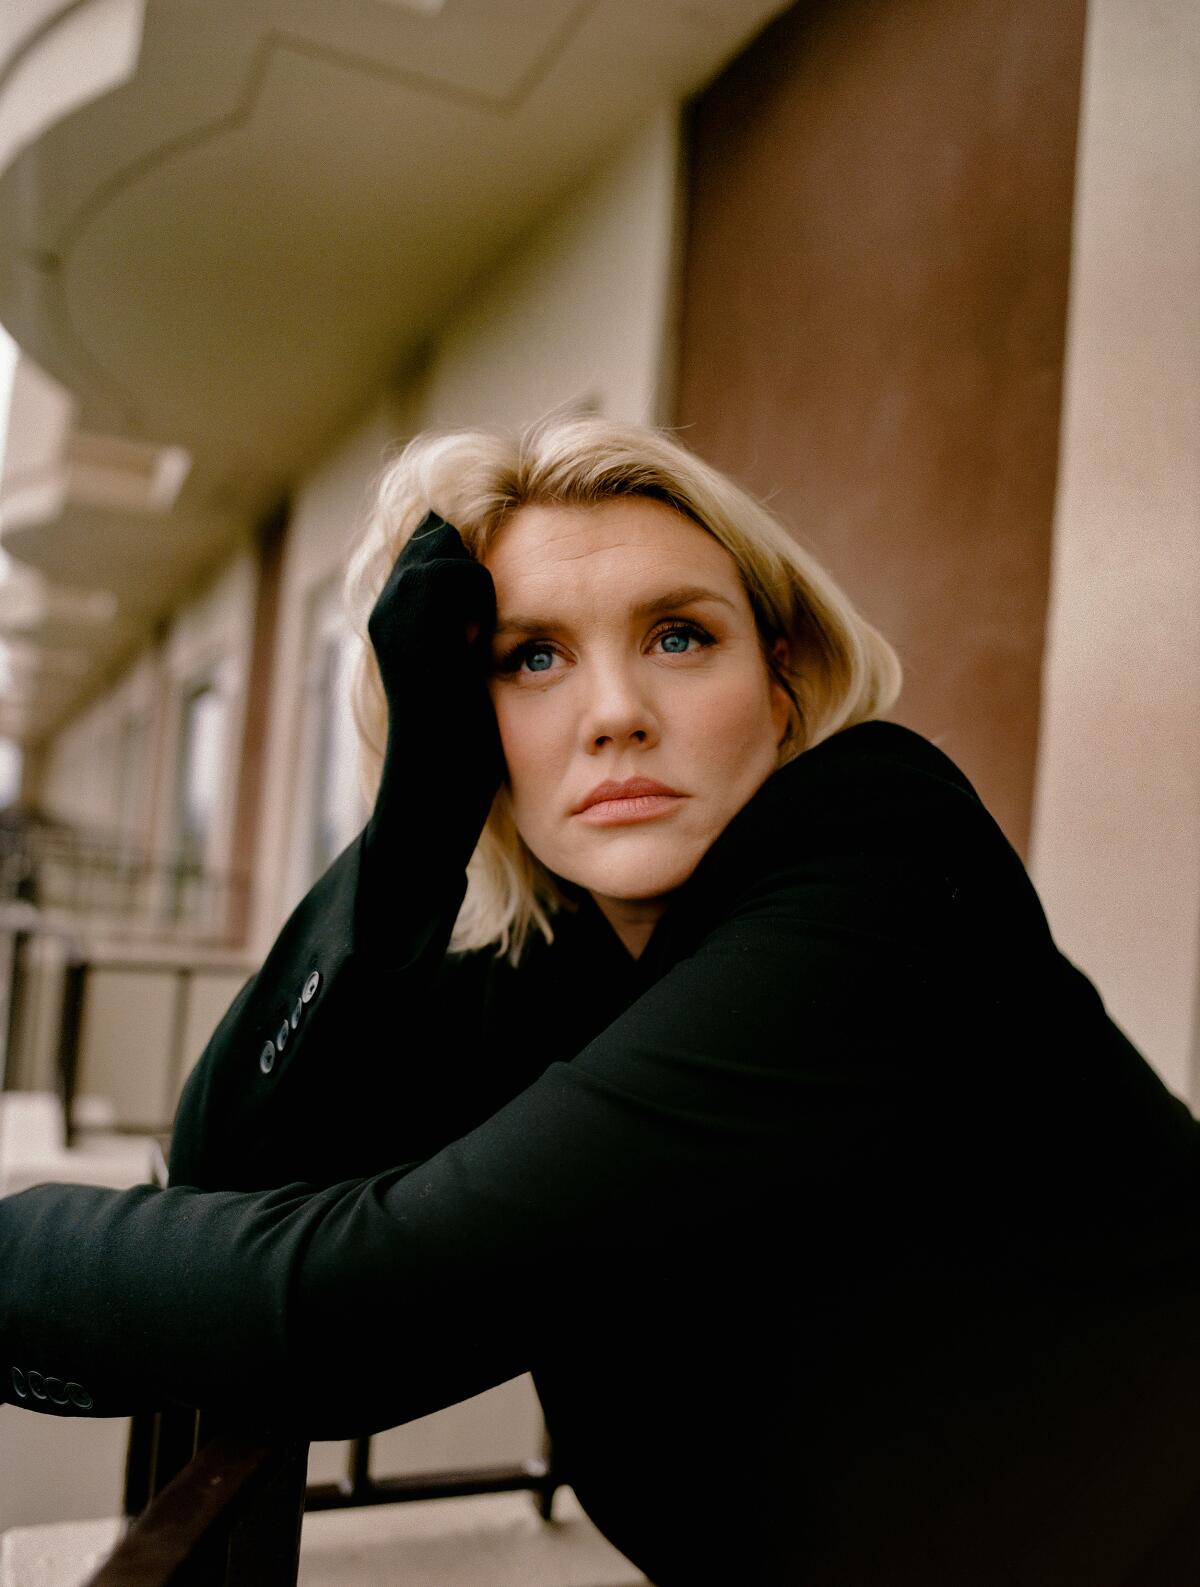 Emerald Fennell wears a black sweater and leans her head on her hand for a portrait.